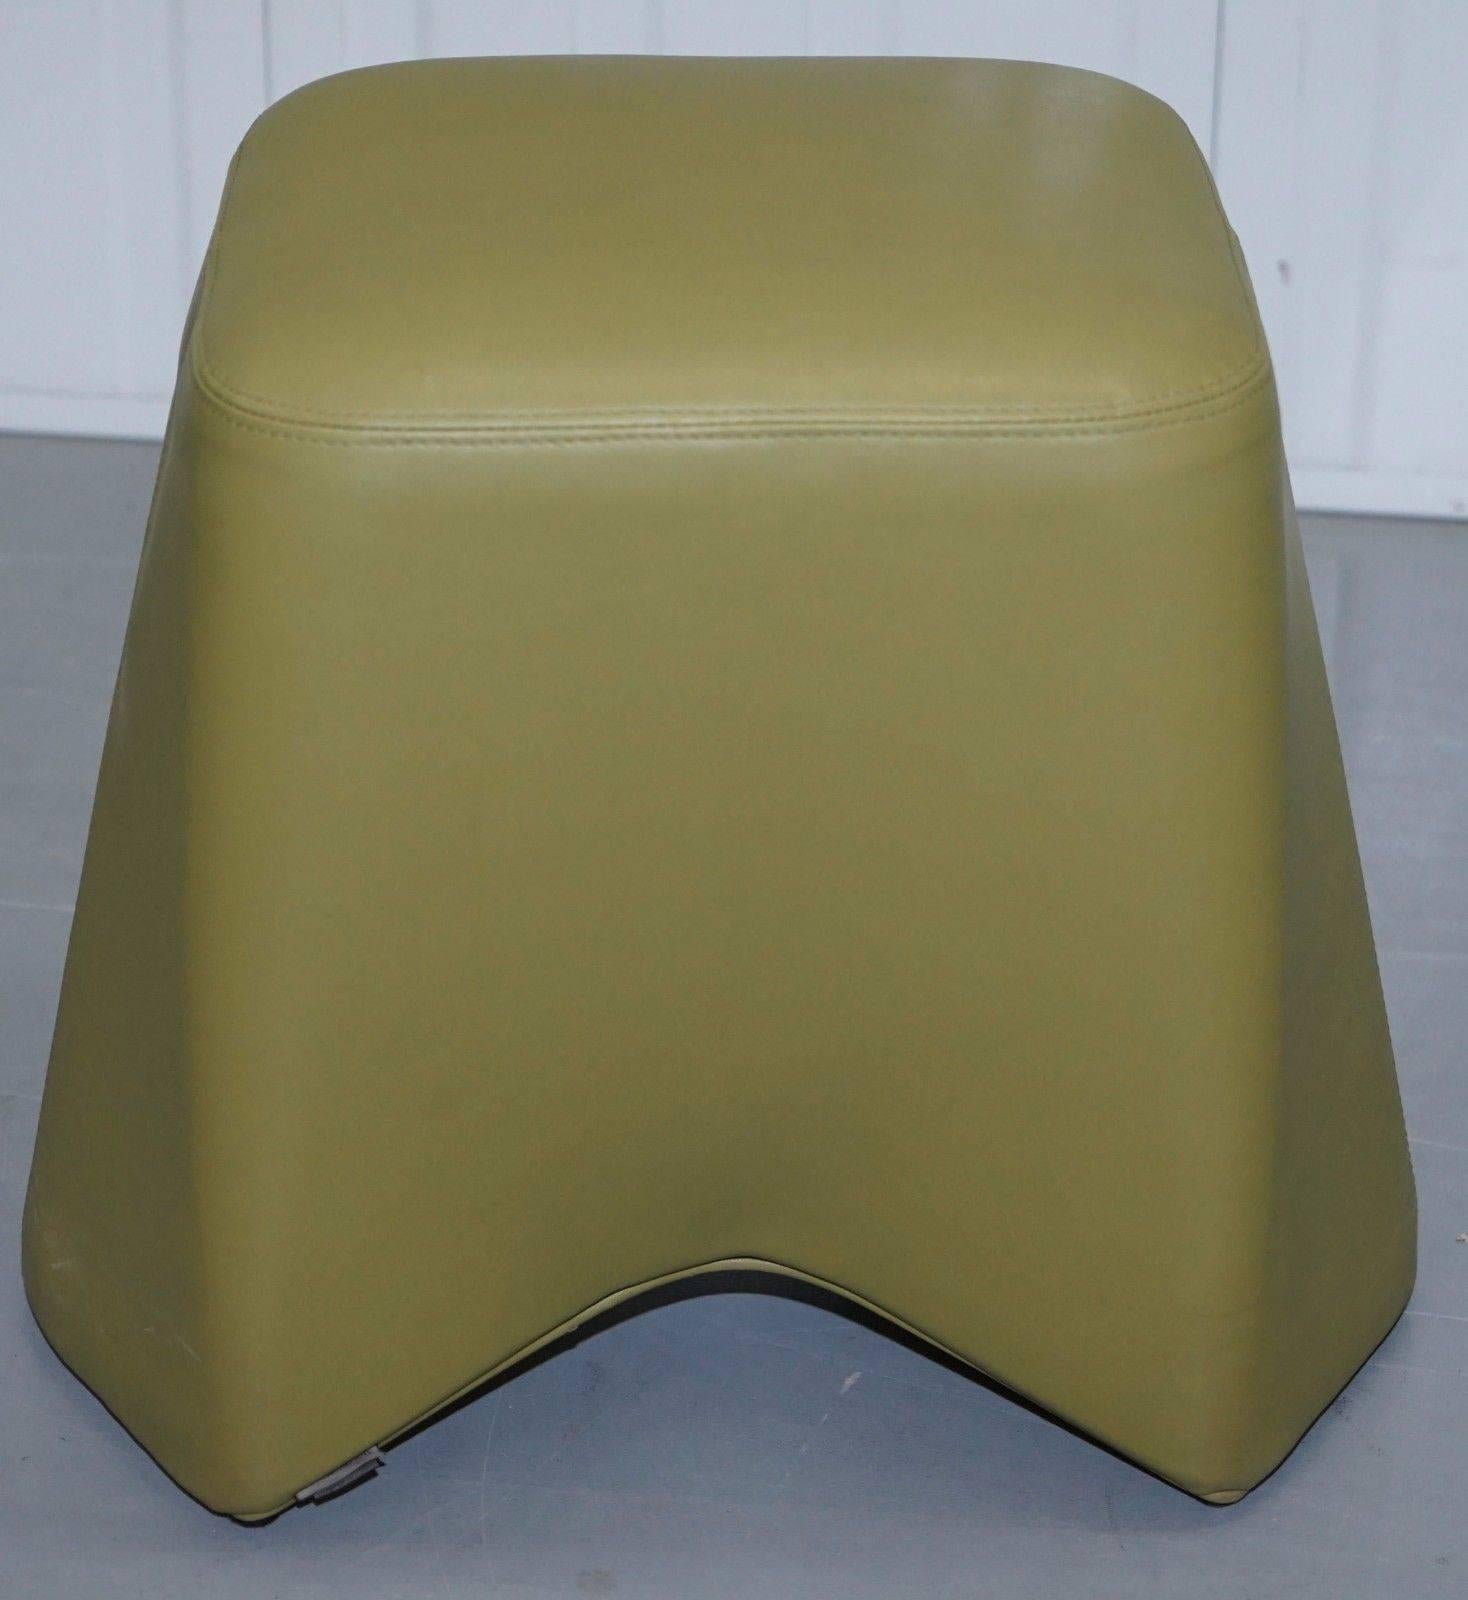 1 of 6 Each Boss Design Hoot Leather Stools Modular Contemporary Design For Sale 3